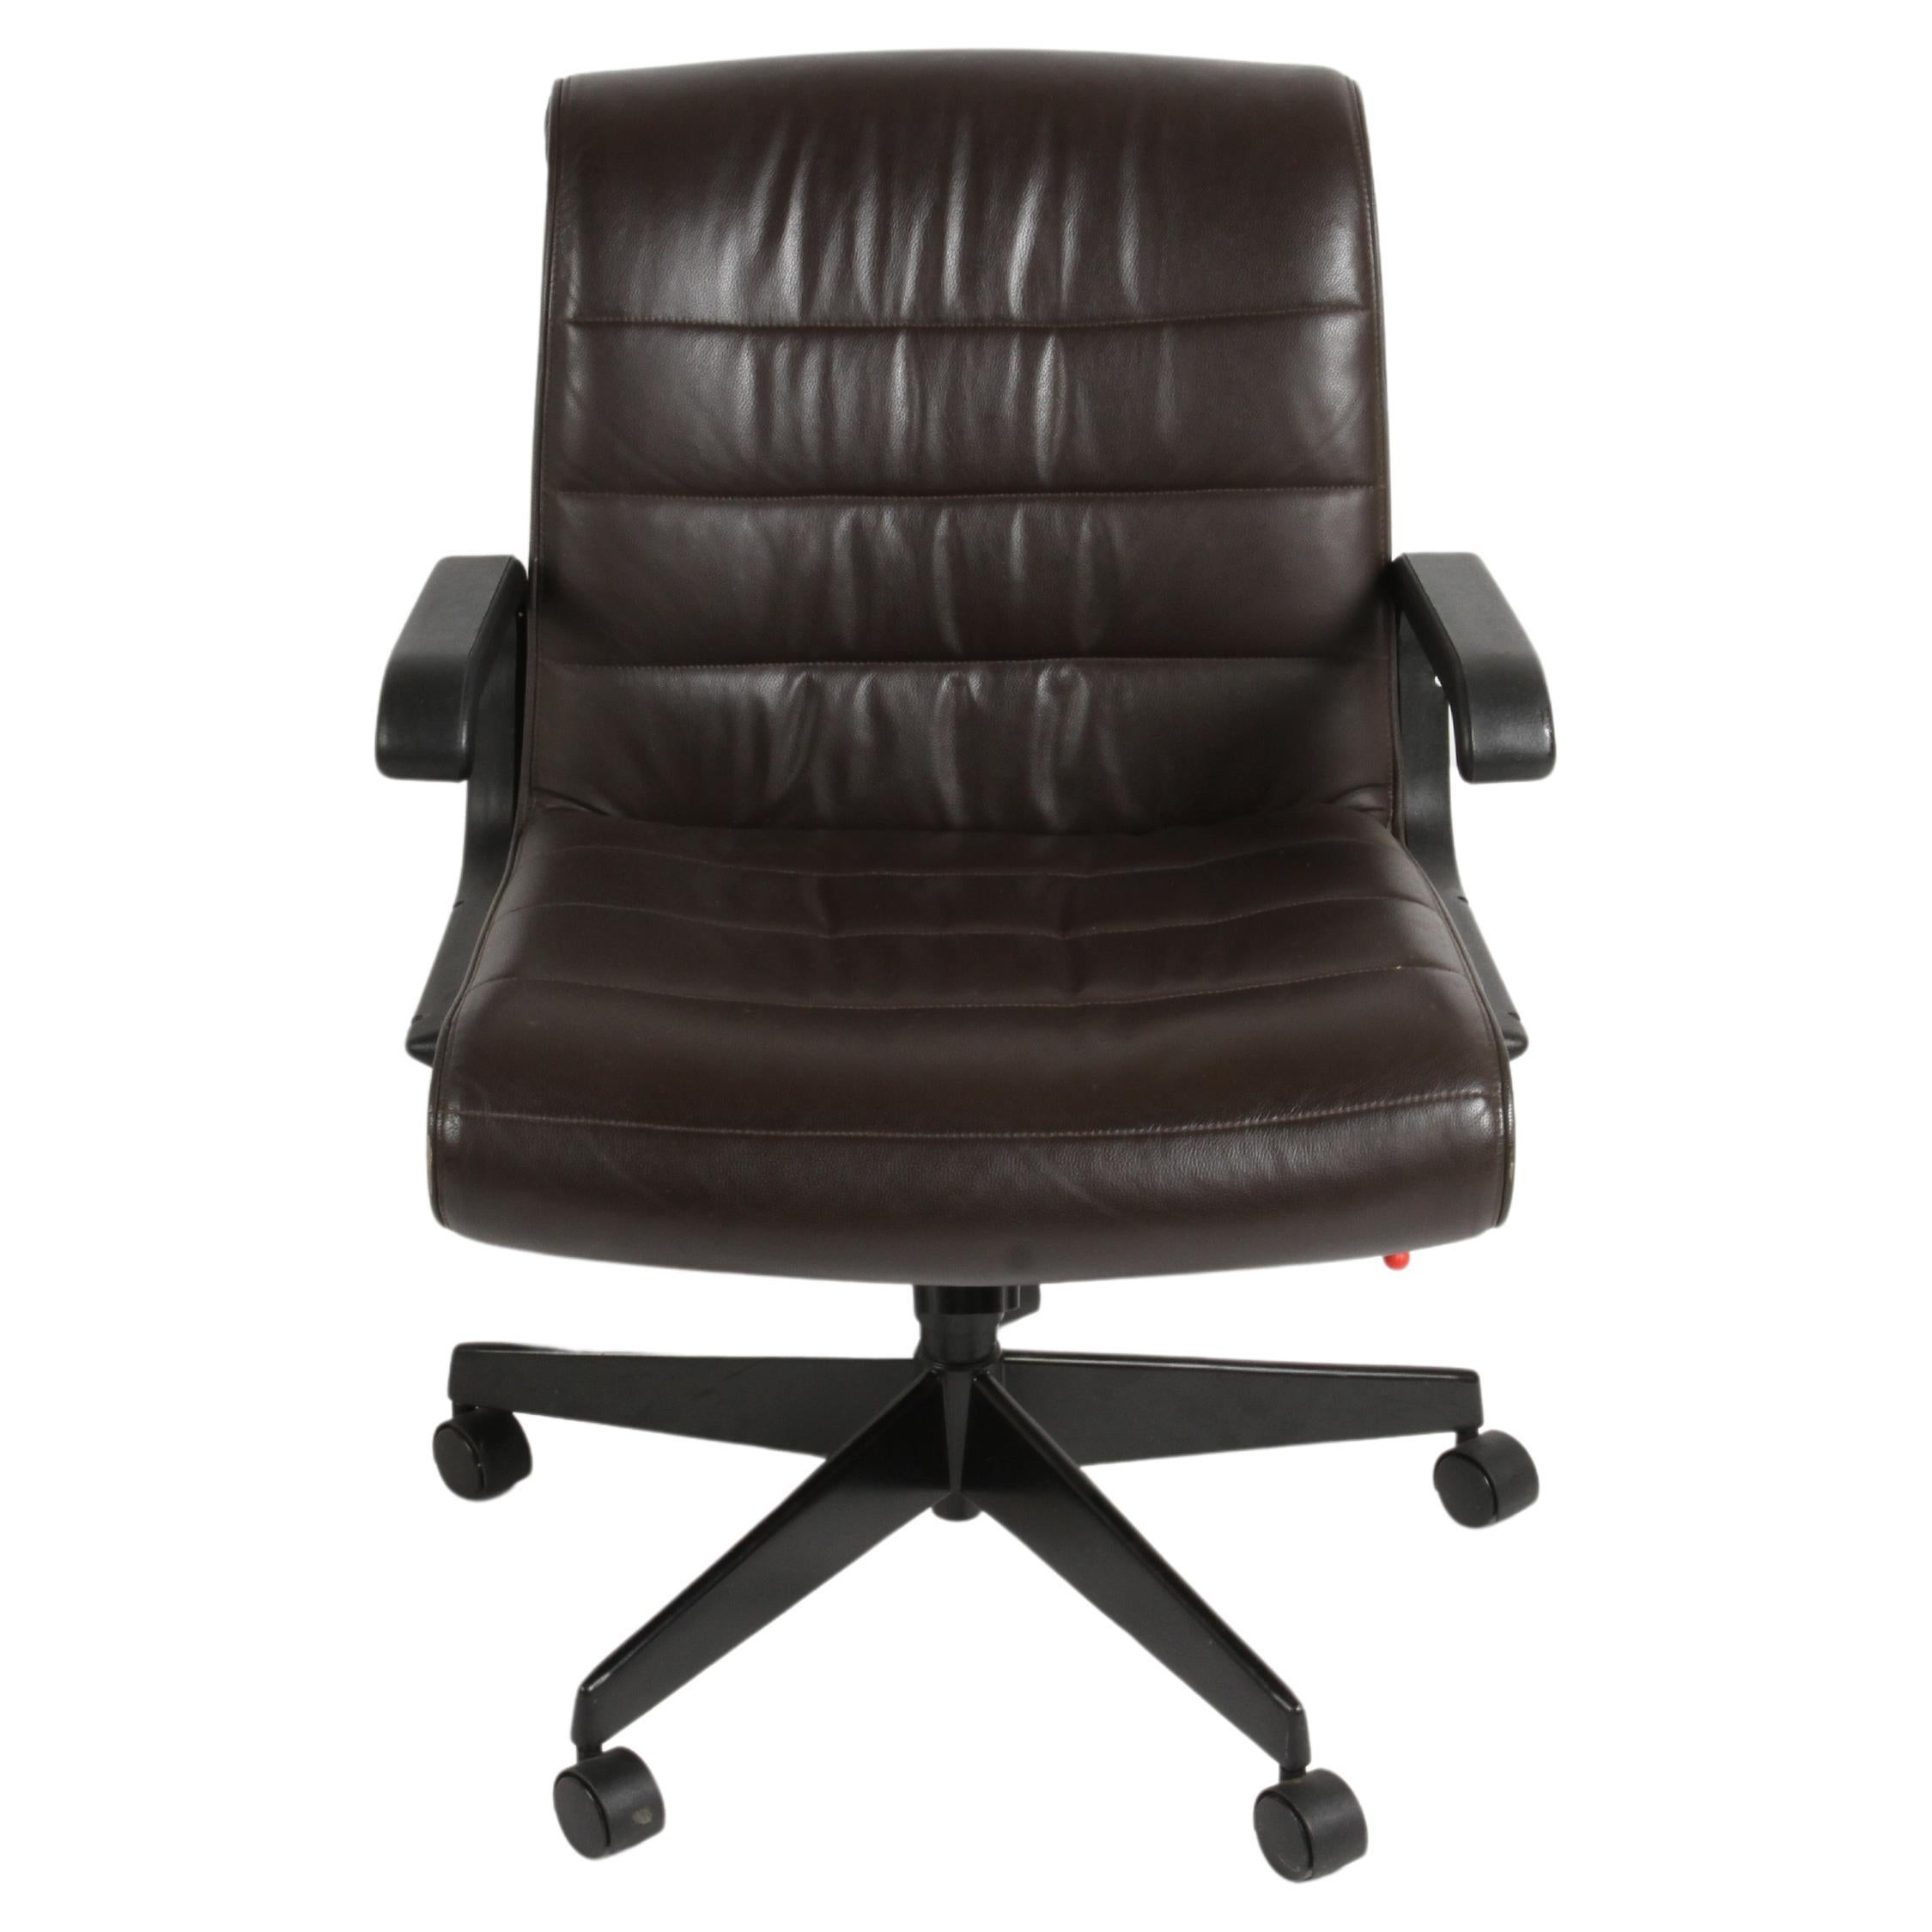 Richard Sapper for Knoll Desk Task Executive or Conference Chair - Brown Leather For Sale